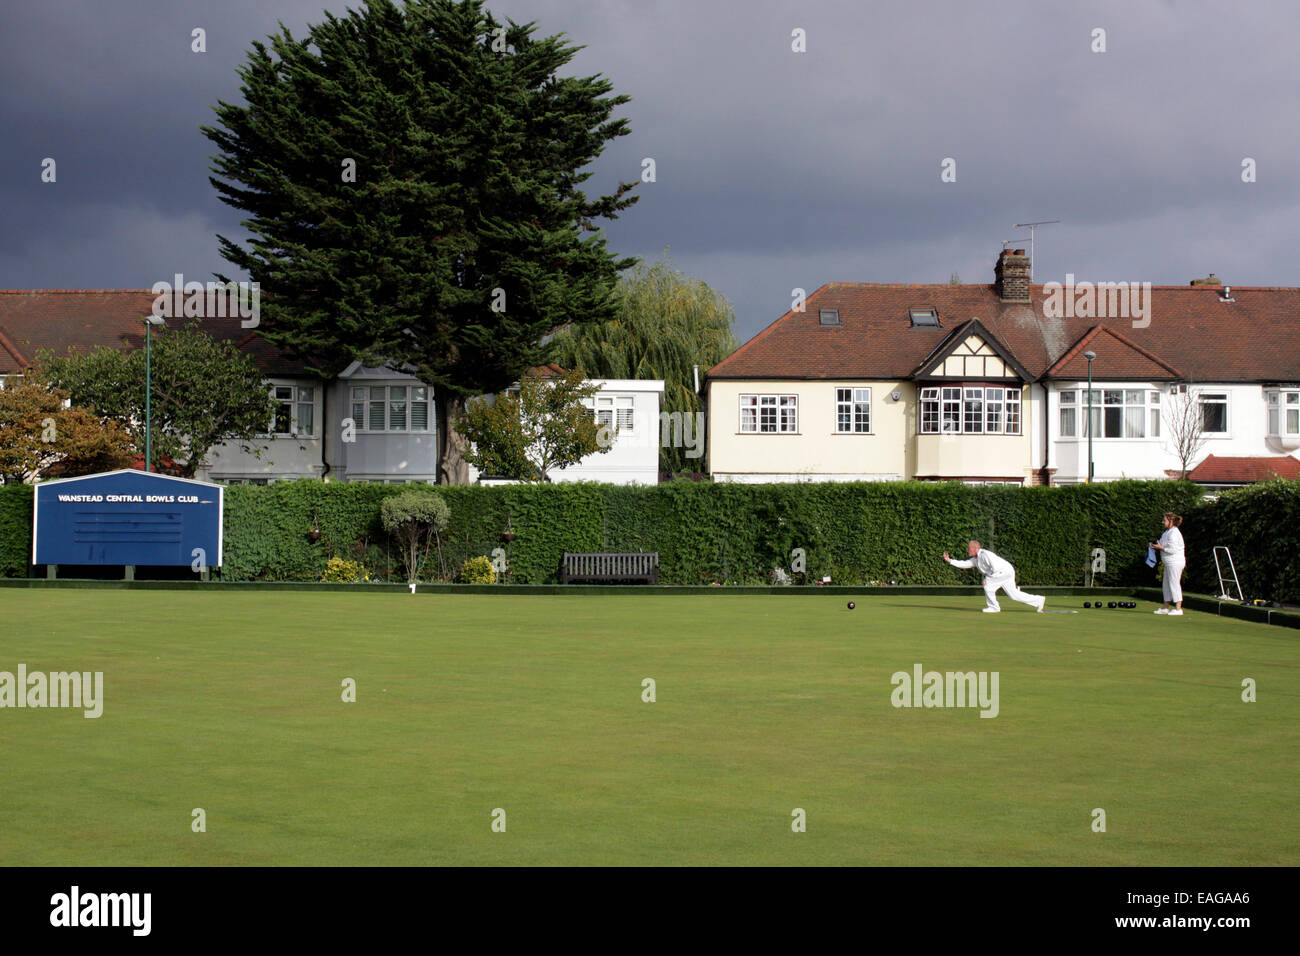 Wanstead Park bowling club in East London Stock Photo